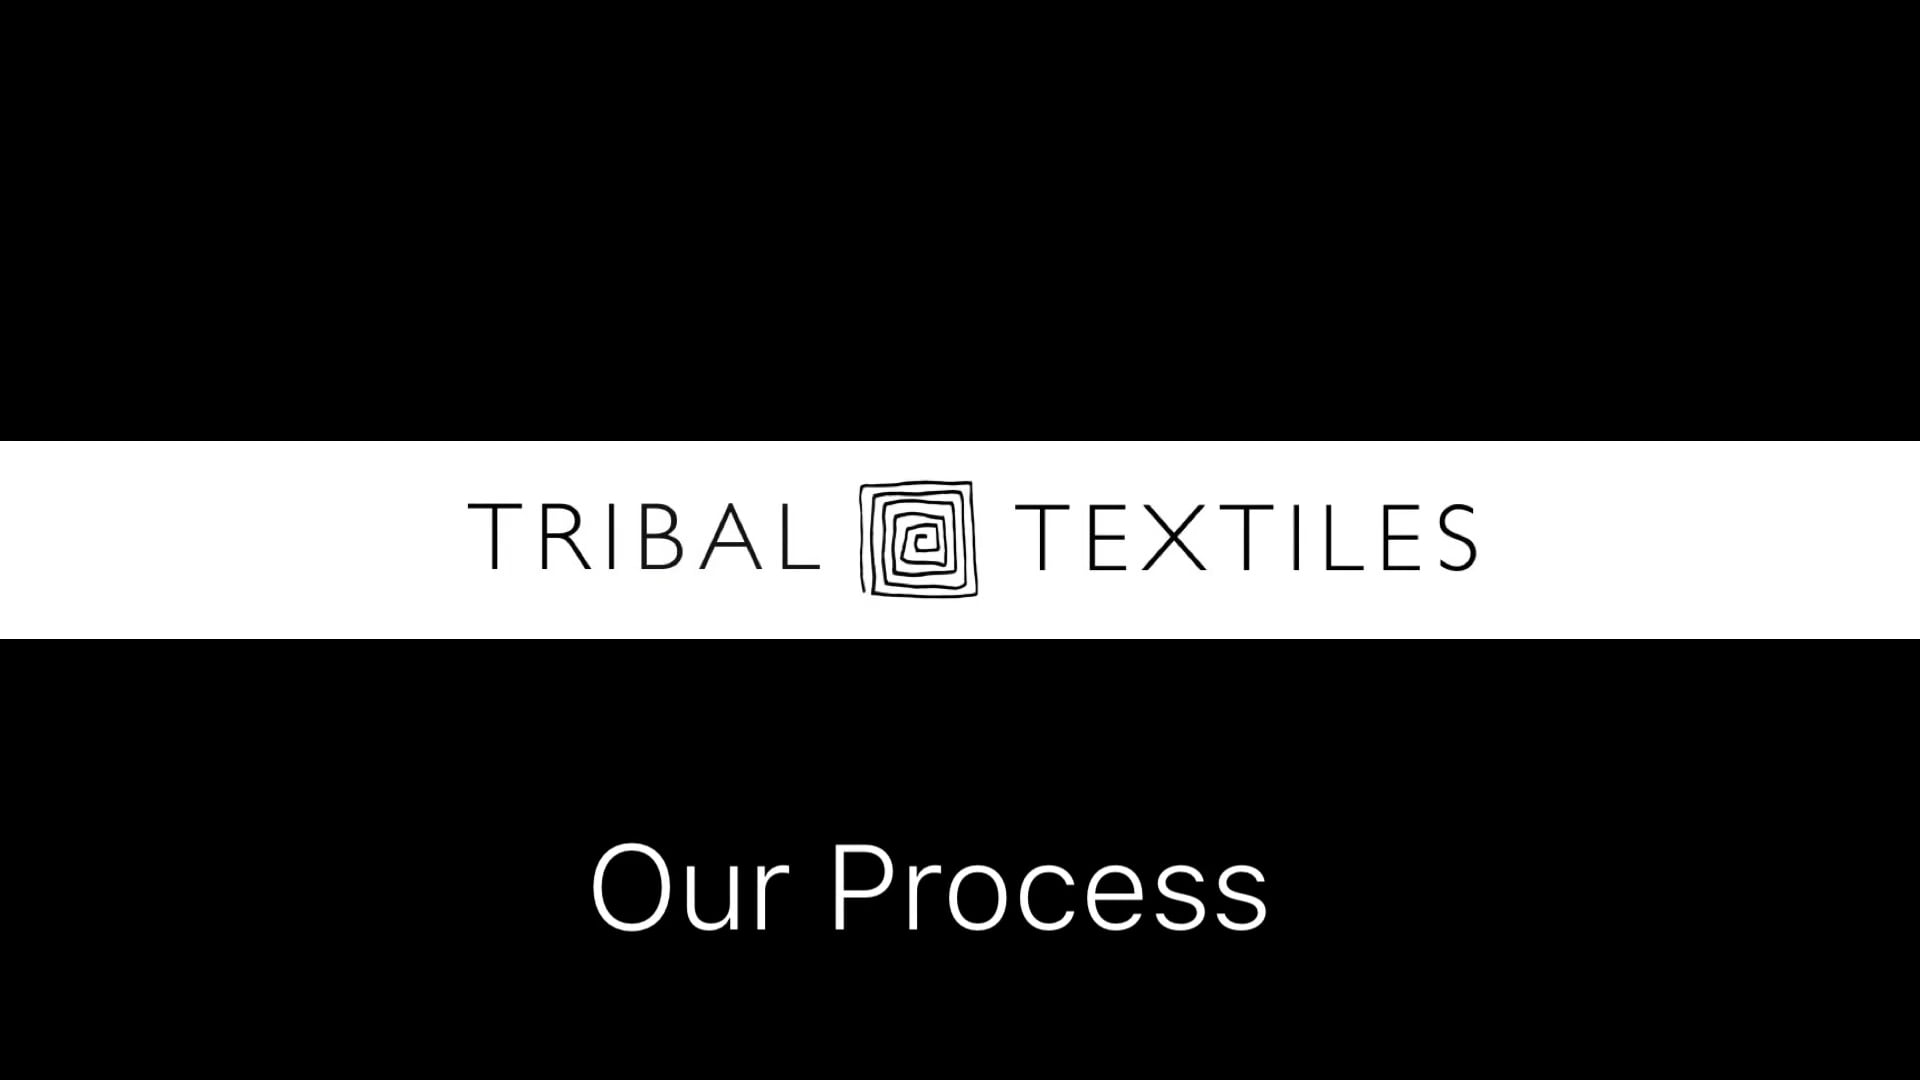 Our Process Video